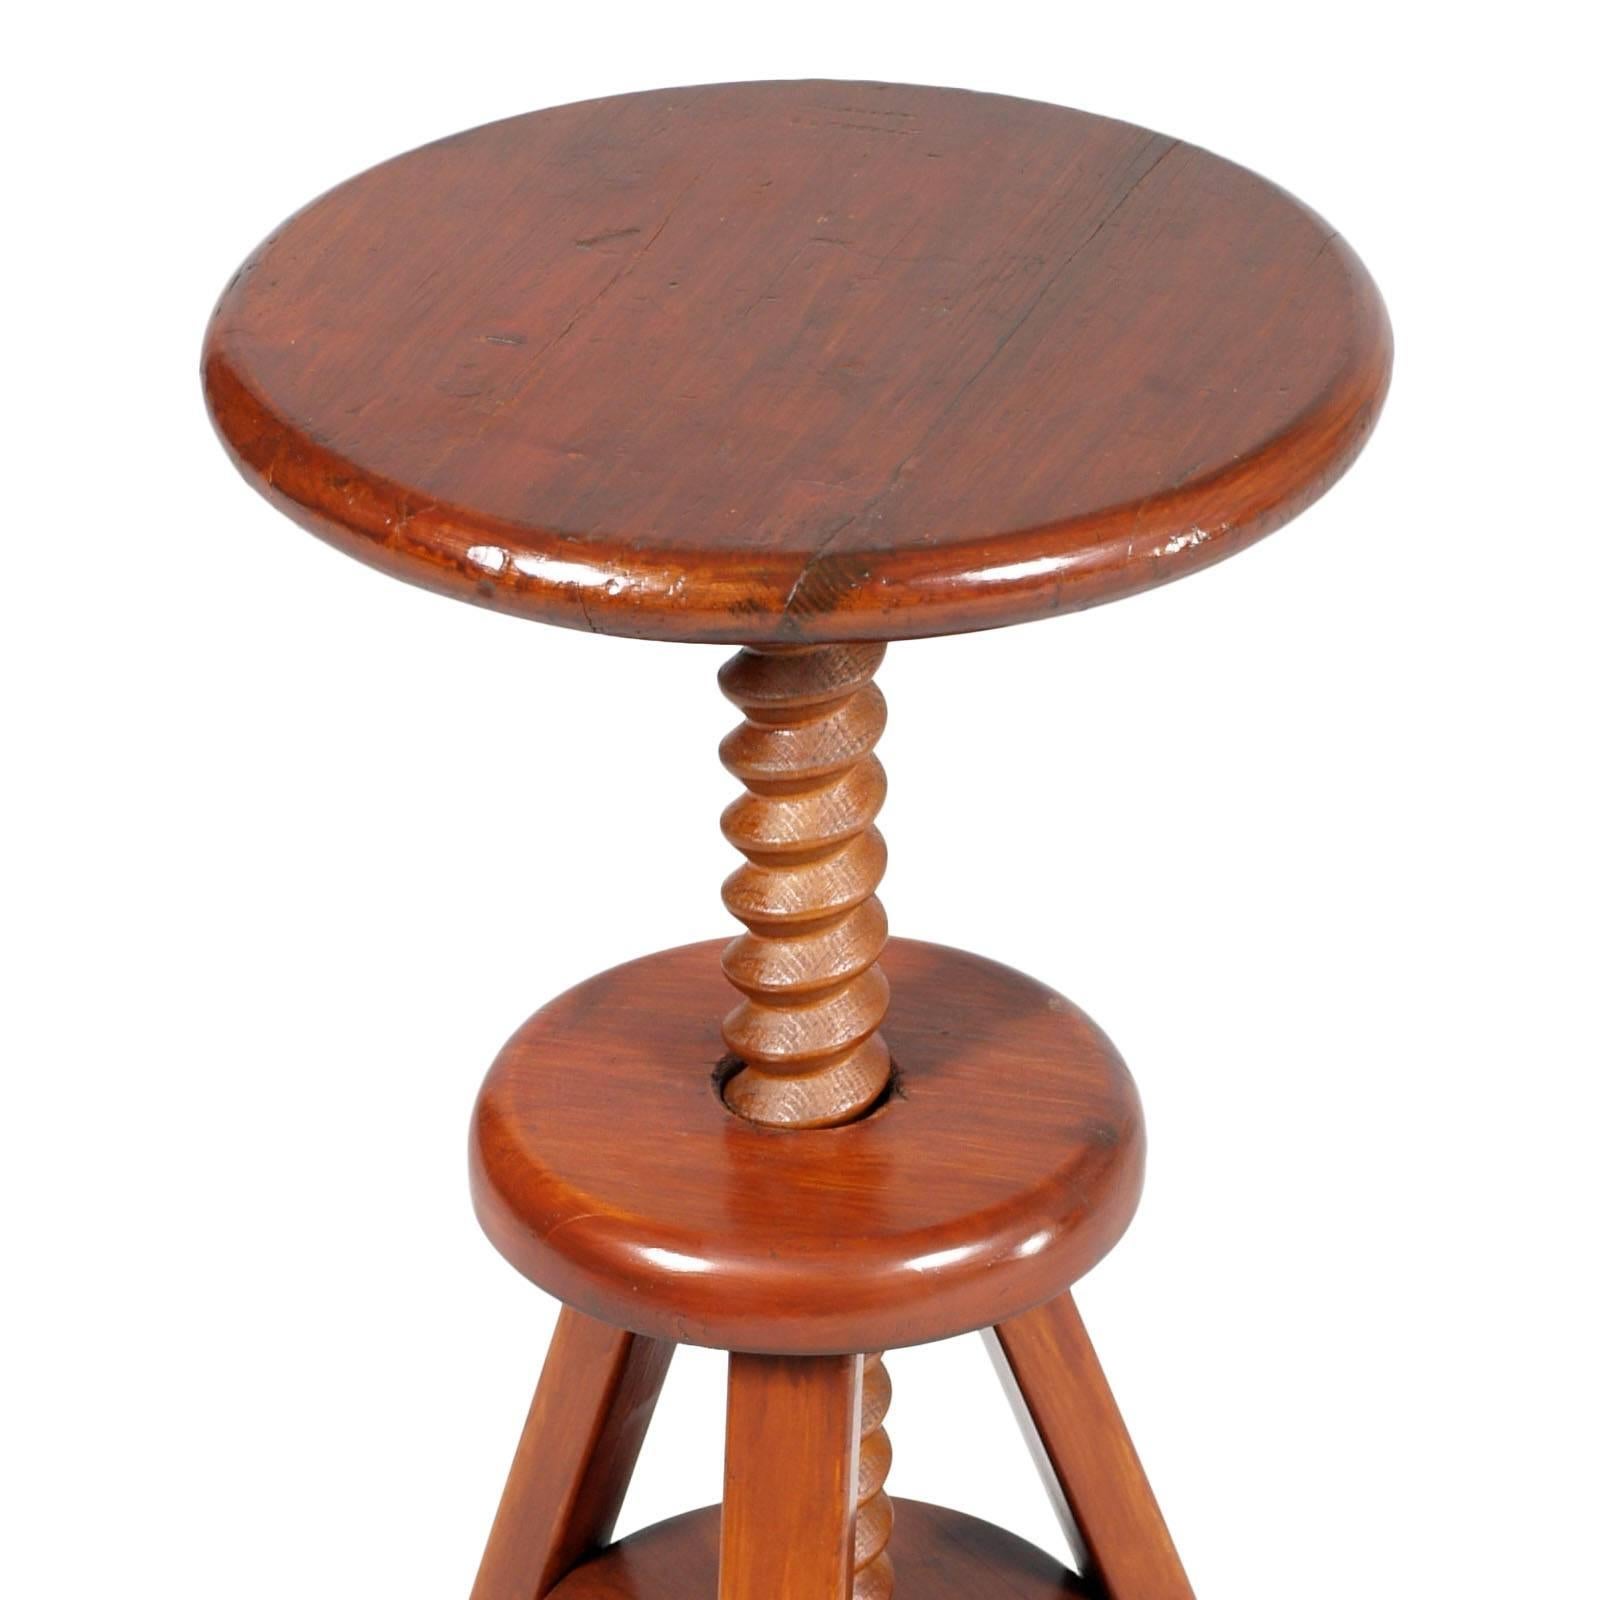 Country Mid-20th Century Tyrolean Adjustable Tripod Stool, in Red Larch Polished to Wax For Sale